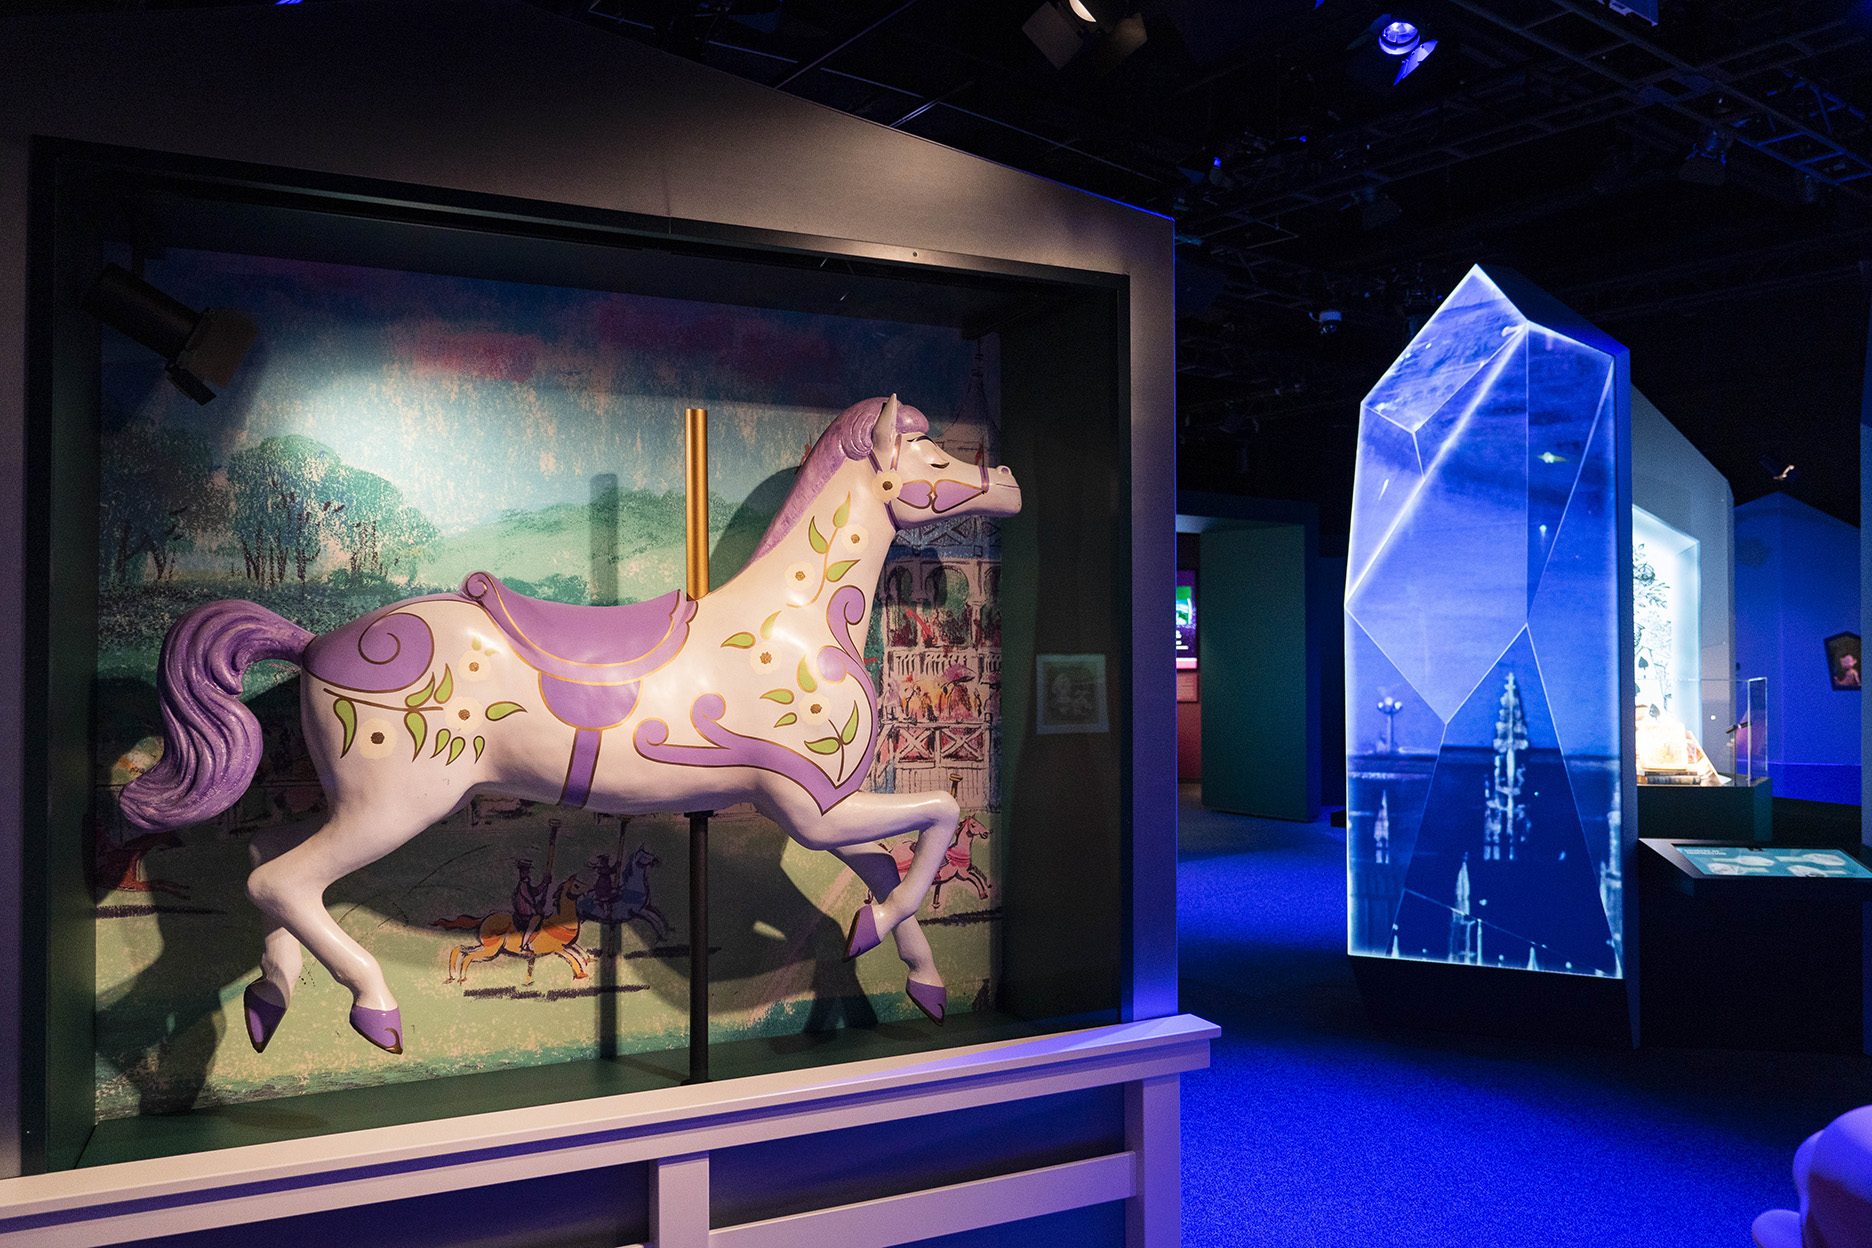 Carousel horse used by Disney Legend Julie Andrews in Mary Poppins (1964) on display at Disney100: The Exhibition, now open at The Franklin Institute in Philadelphia.